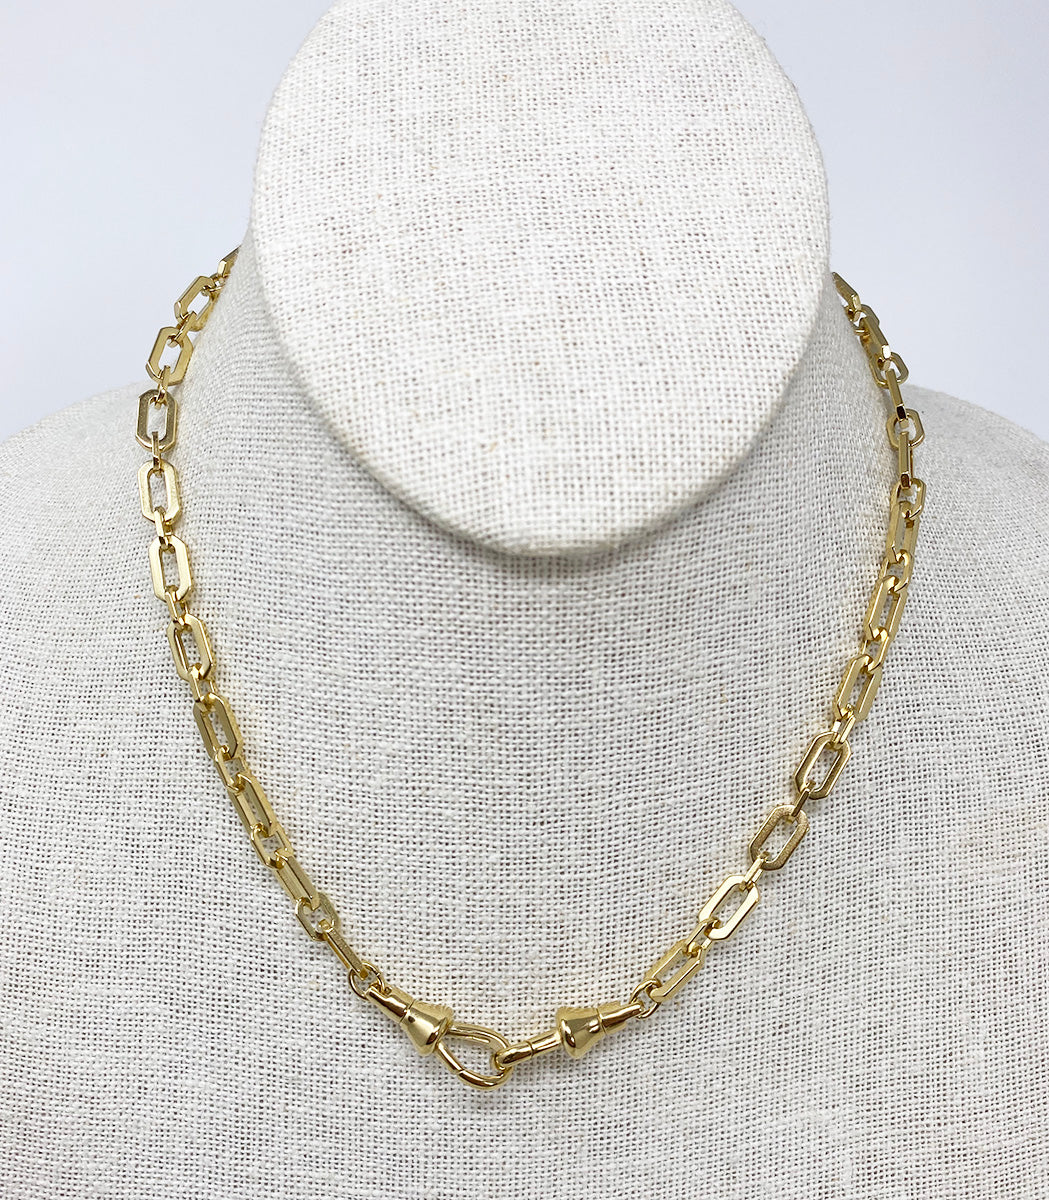 Jimmy Chain Necklace - Heavy Chain